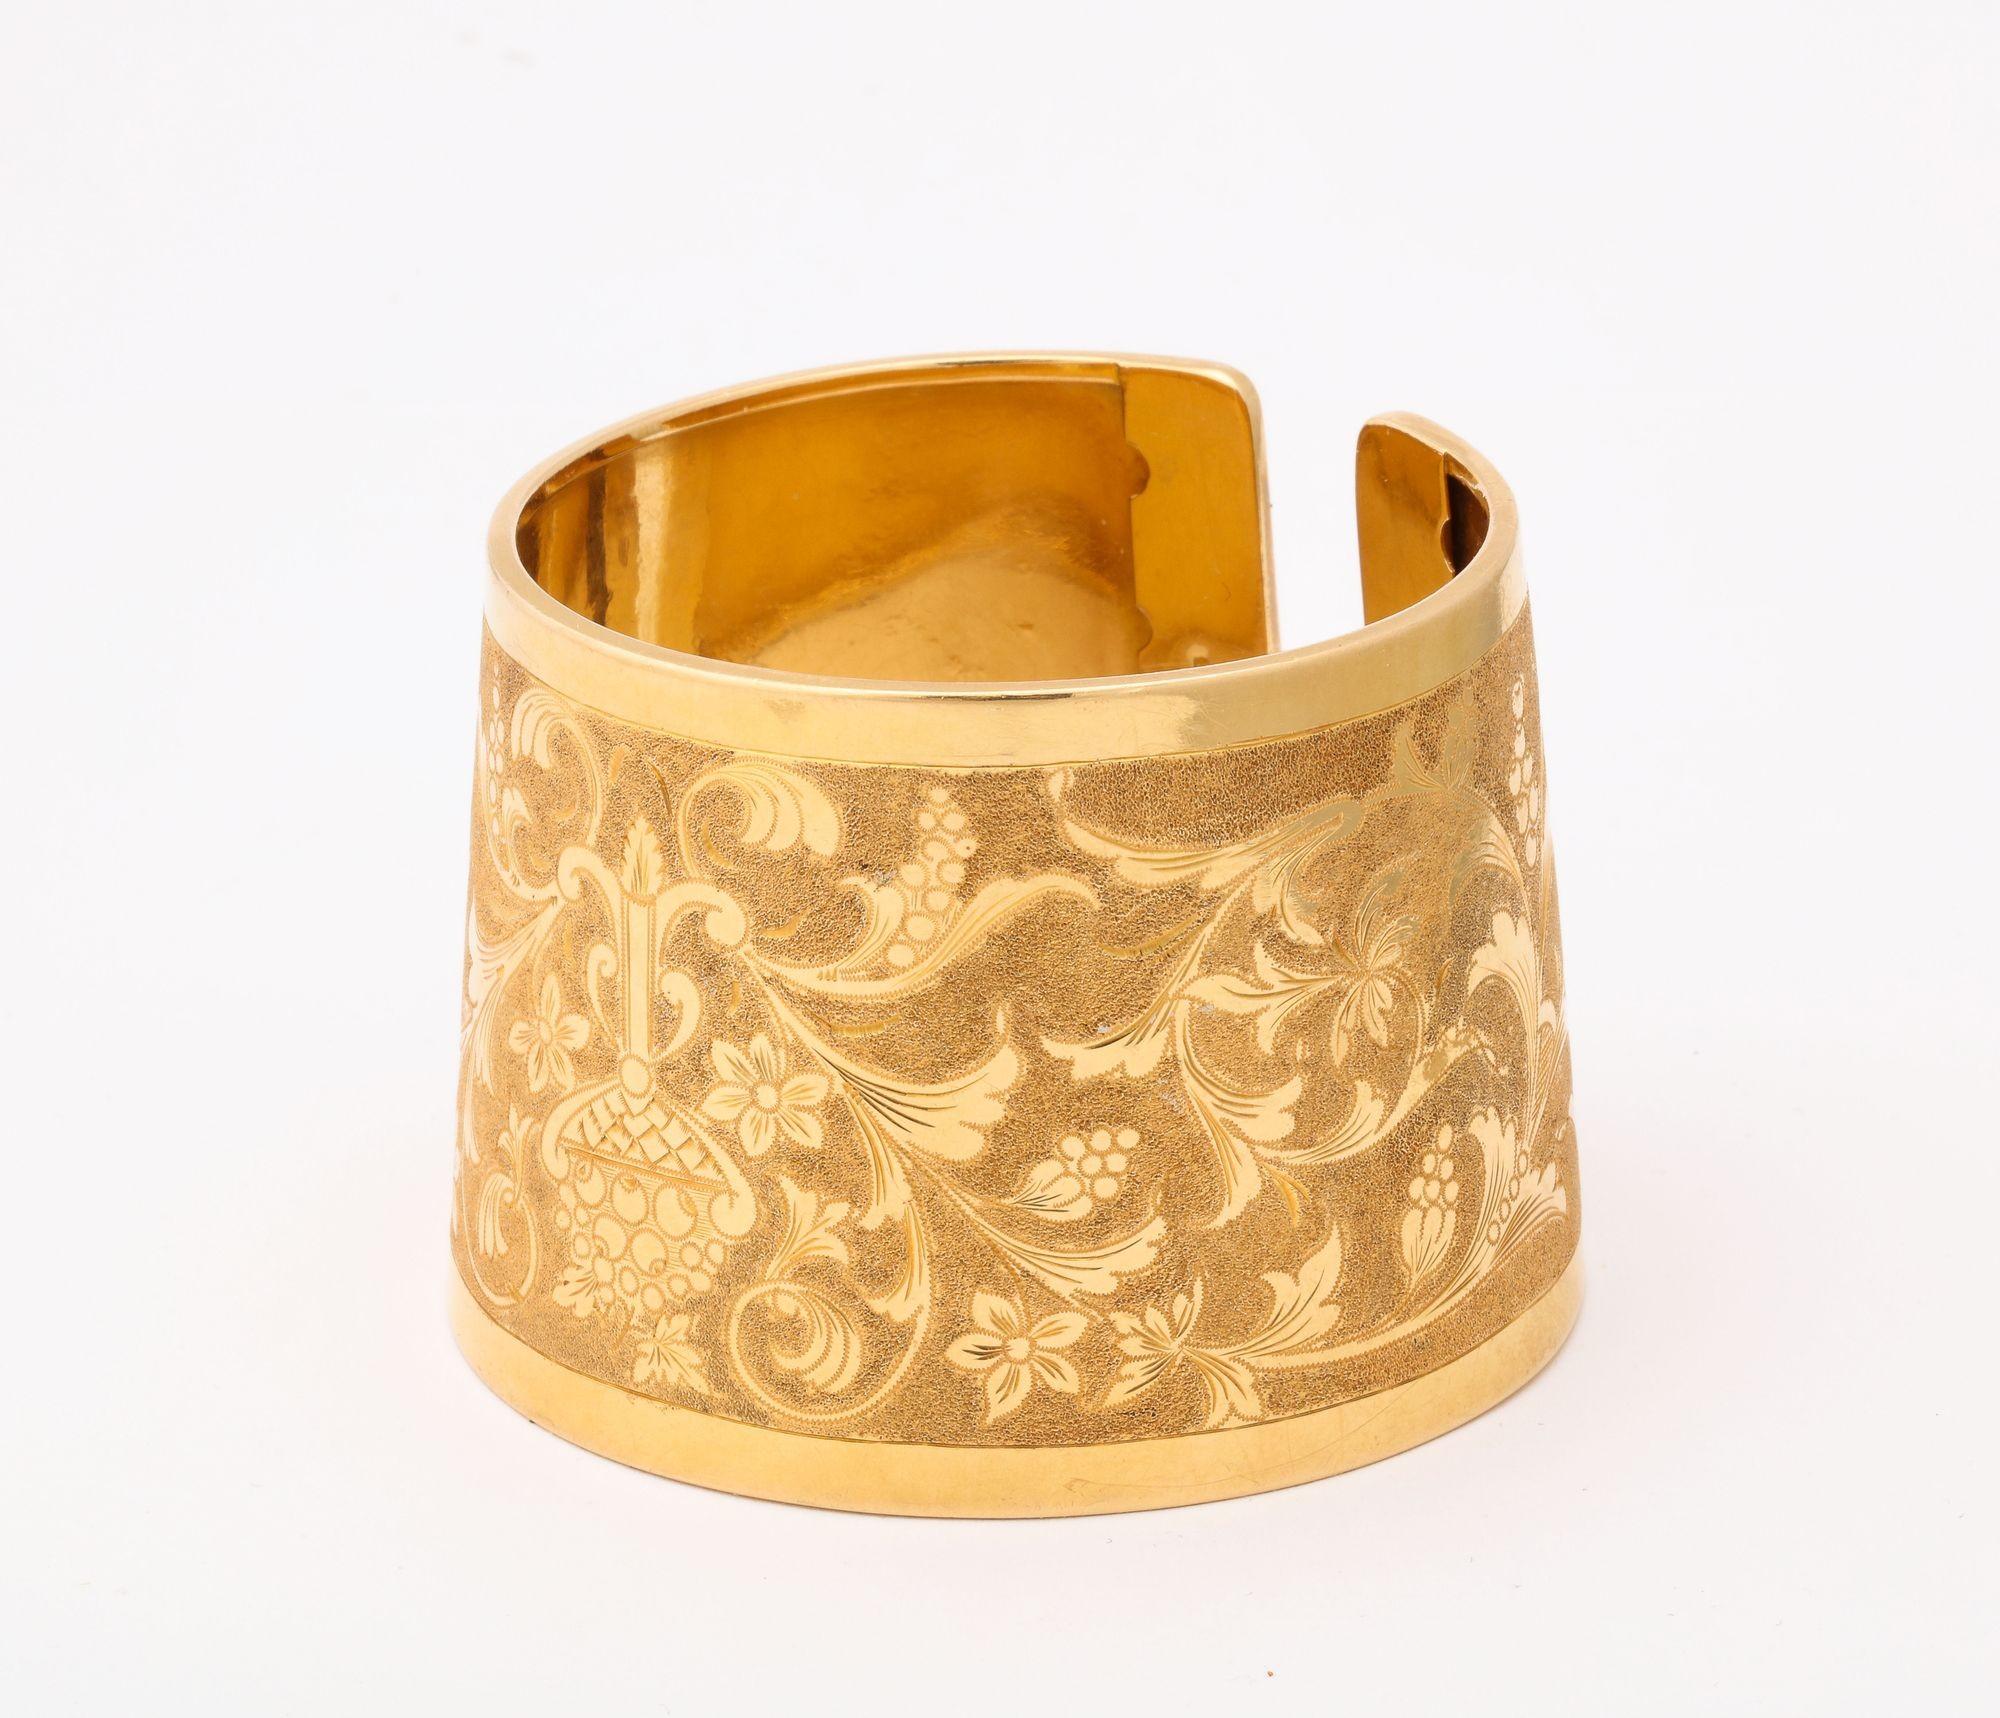 Women's Italian Classical  Engraved Cuff With Two Tone Gold For Sale